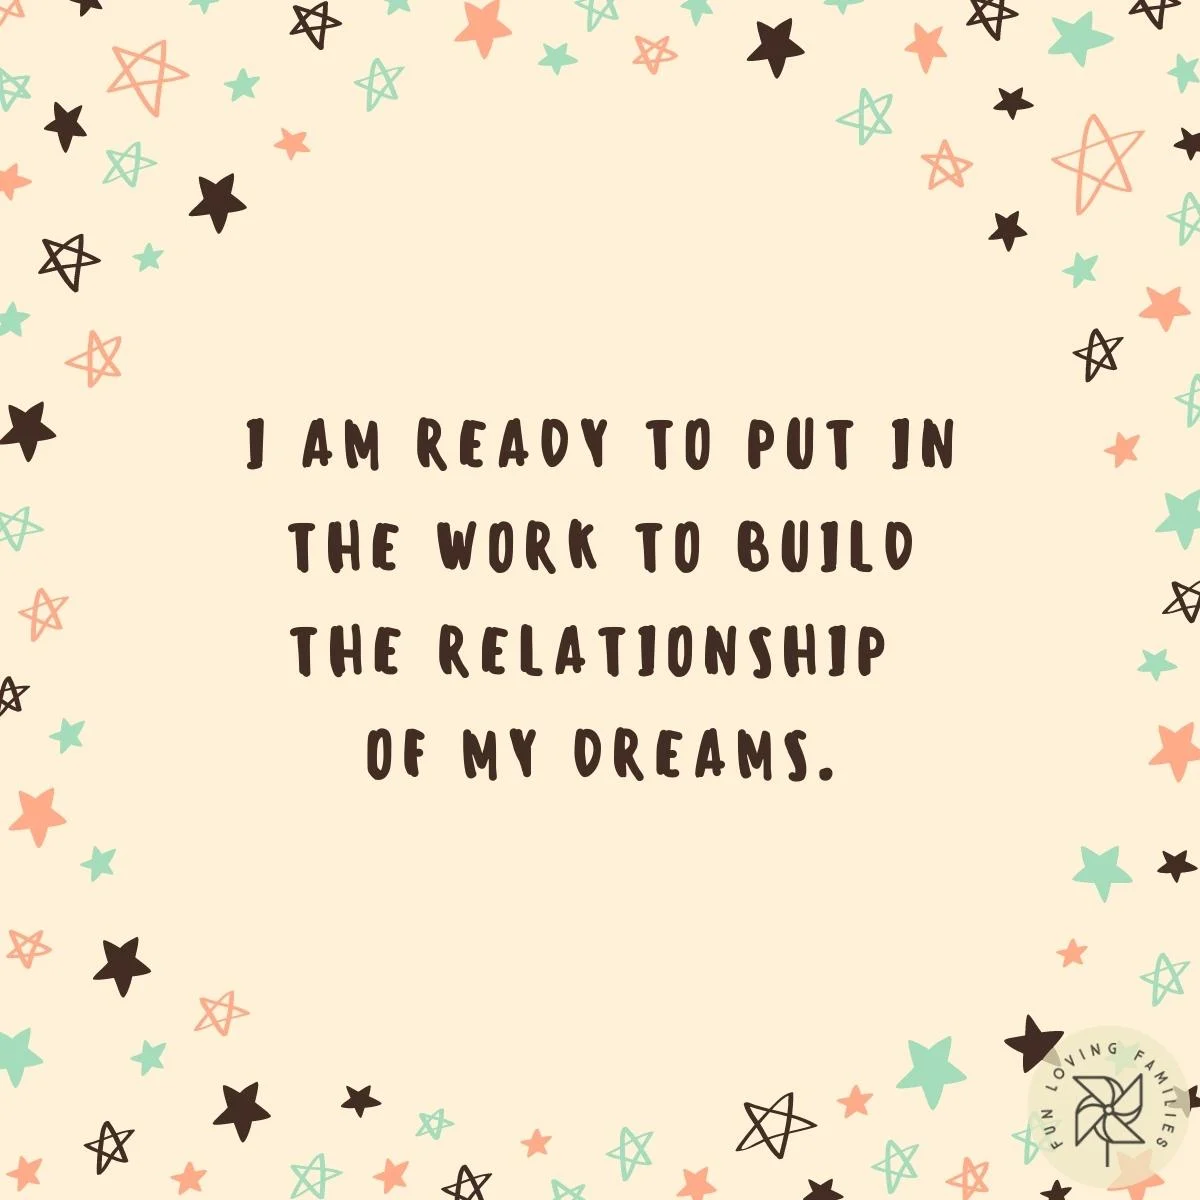 I am ready to put in the work to build the relationship of my dreams affirmation image